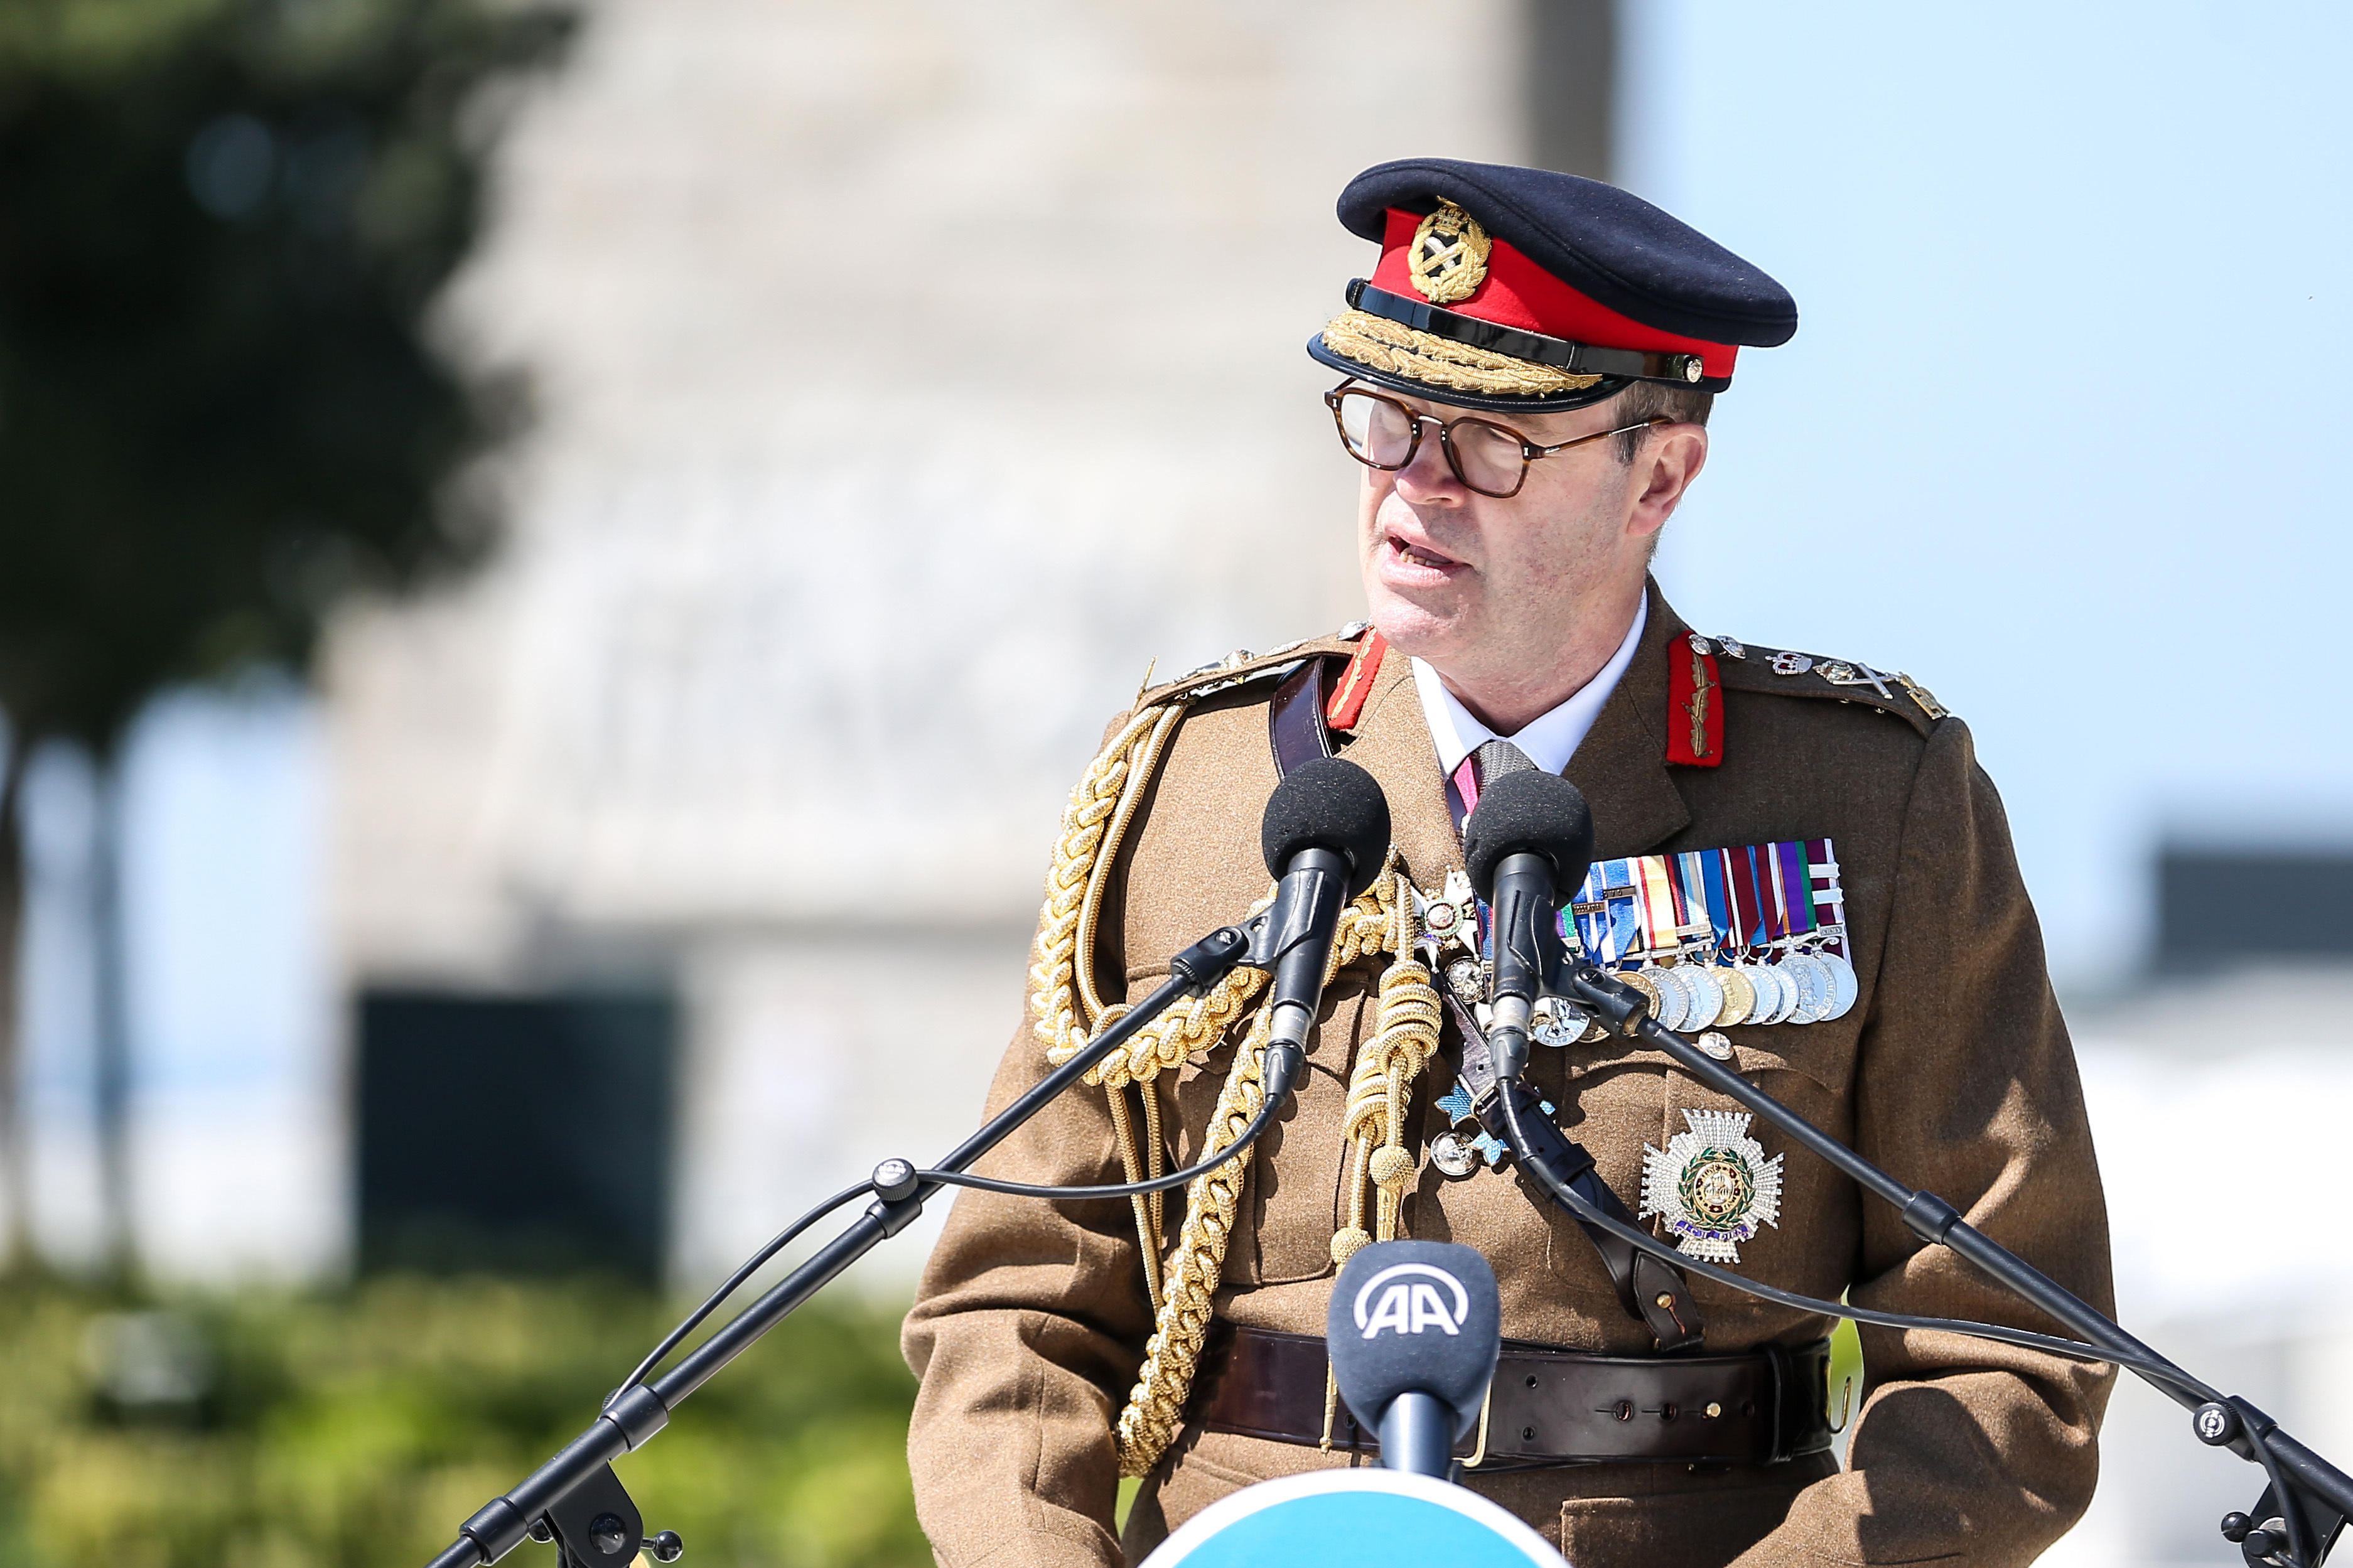 u.k. army chief says citizens should be ready to fight in possible land war